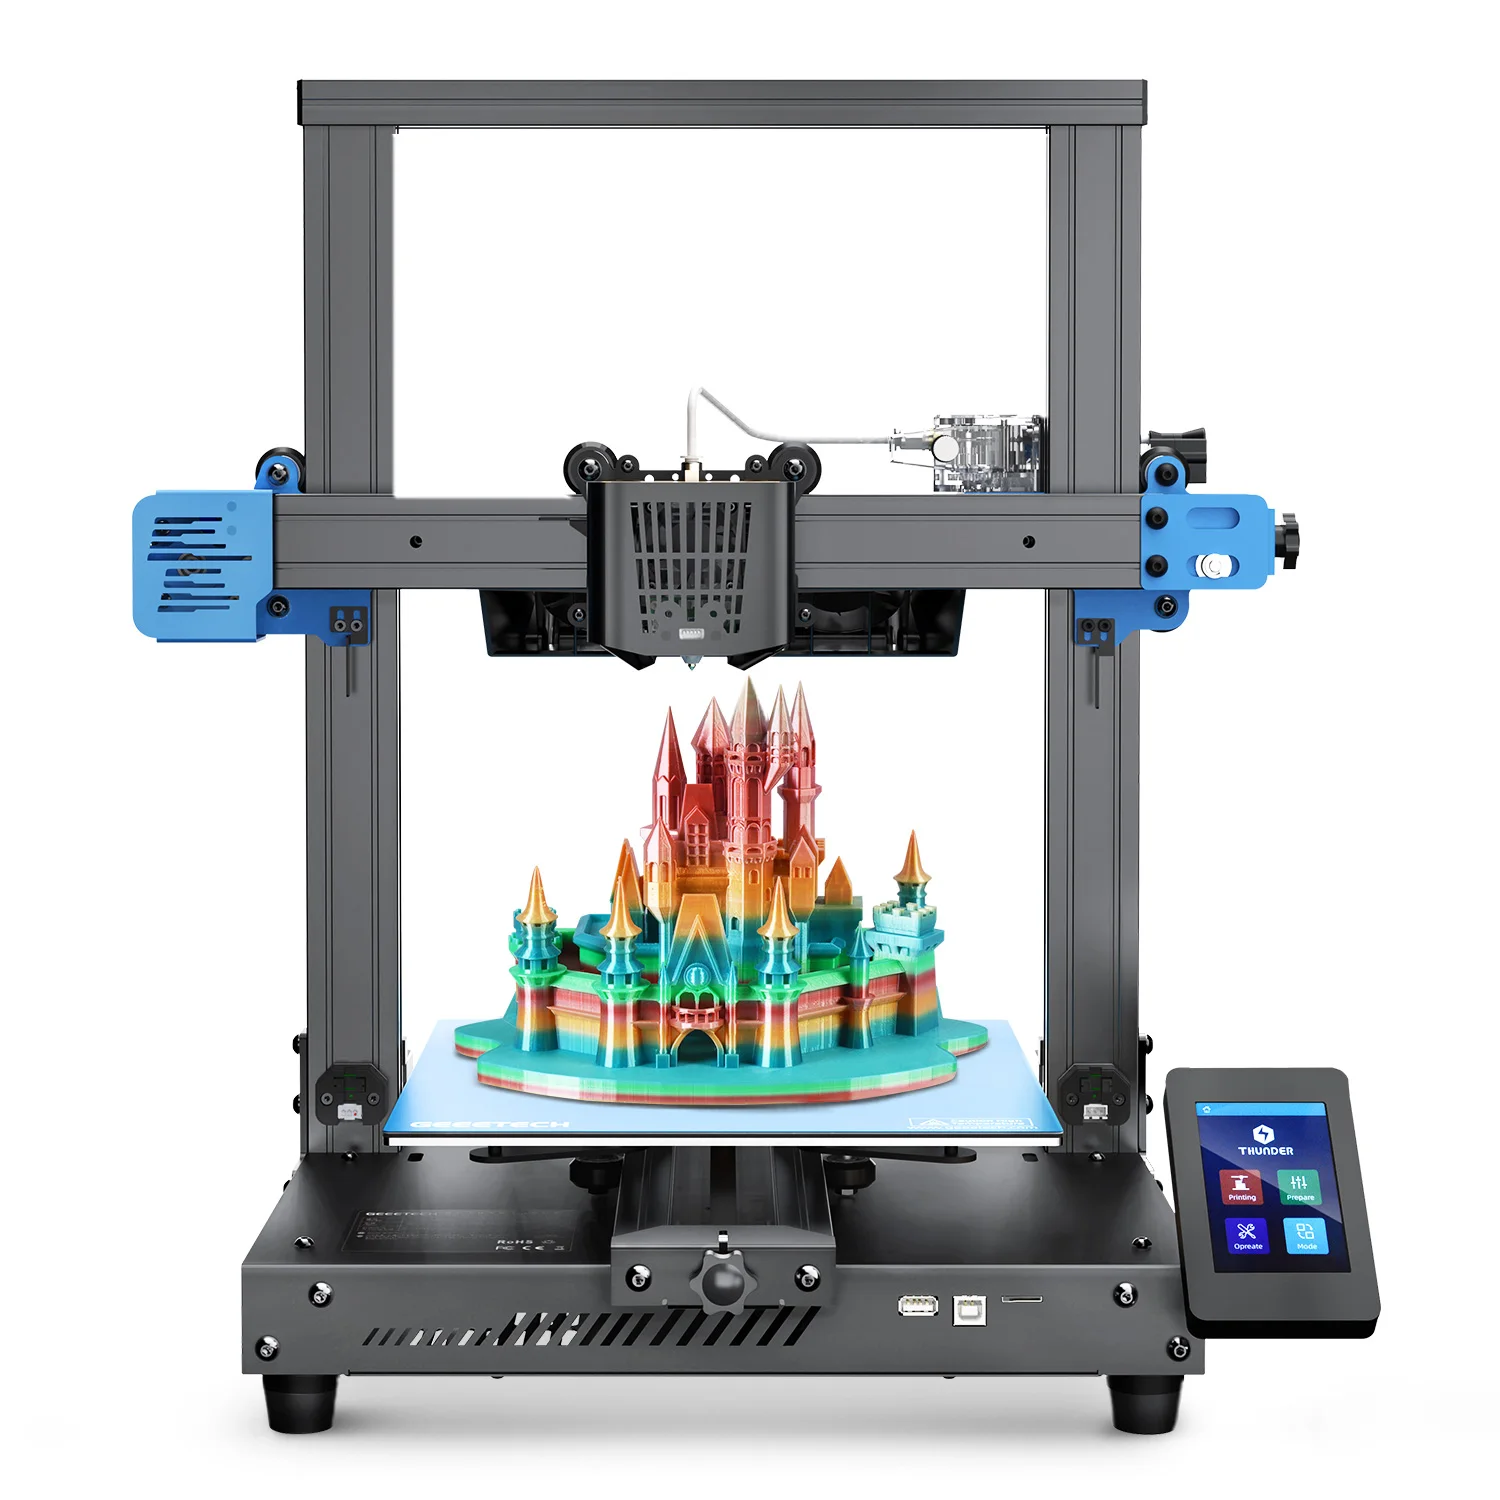 

Geeetech THUNDER High Speed 3D Printer, Fast printer, Up to 300mm/s, X/Y Axis Closed-loop Control, Print Volume 250*250*260mm